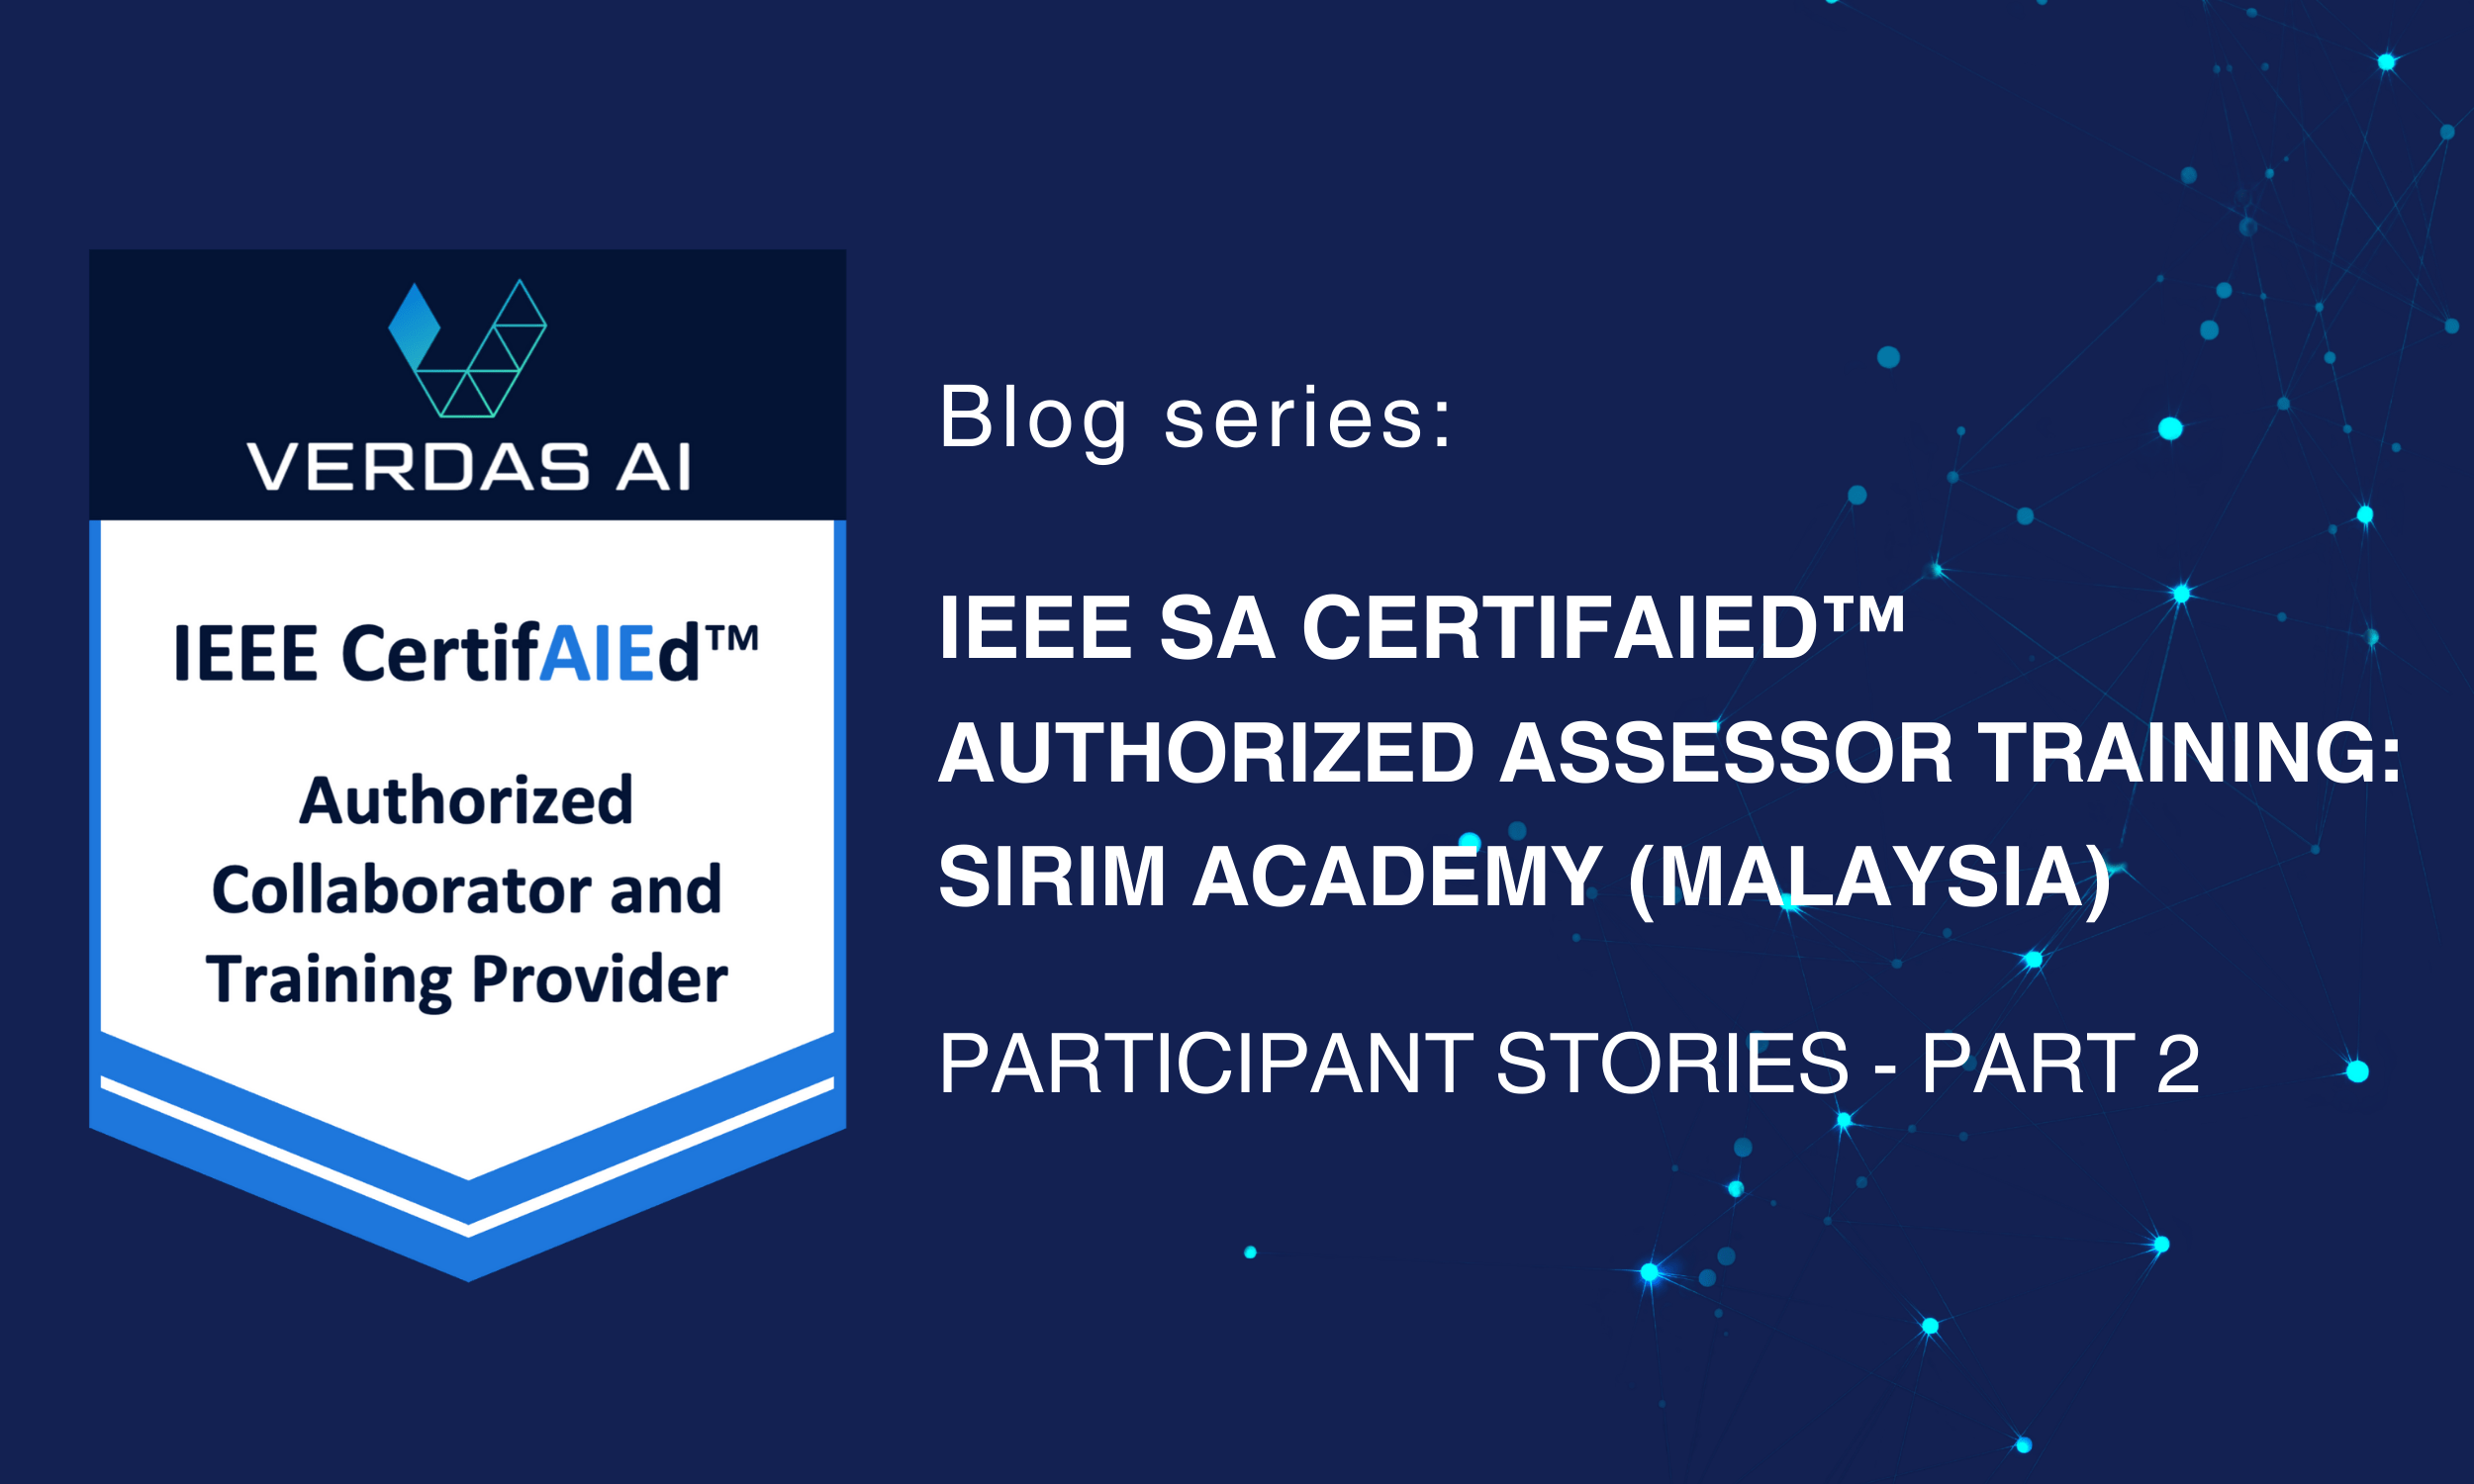 IEEE SA CertifAIEd™ Authorized Assessor Training: SIRIM Academy (Malaysia) - Participant Stories - Part 2